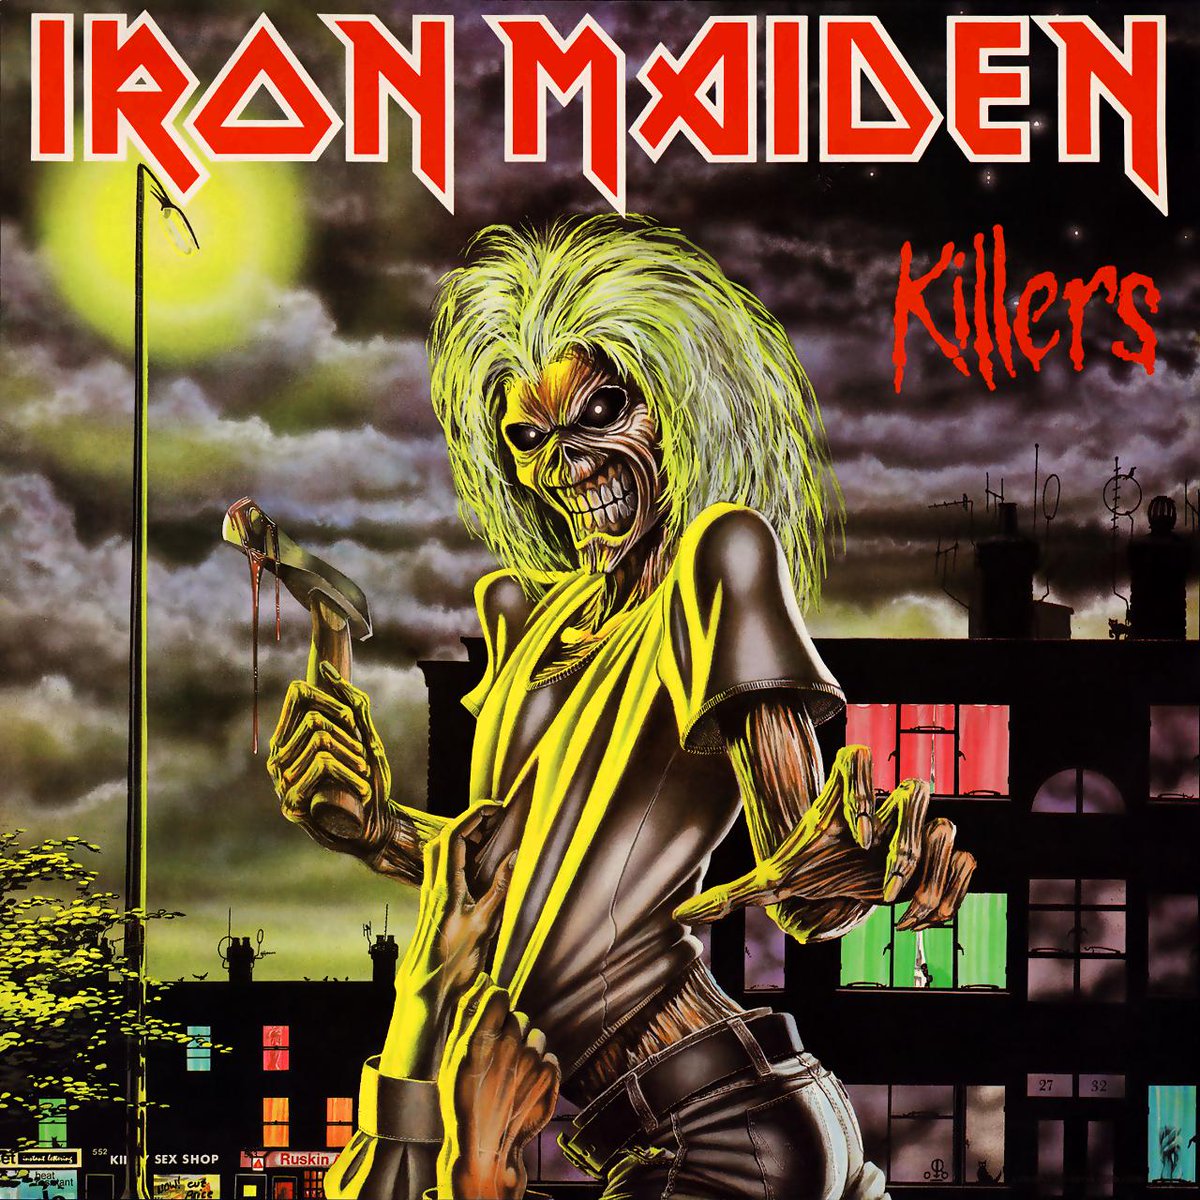 Been listening to this #metalmasterpiece all day today.These guys really know how to make #killer songs! @IronMaiden